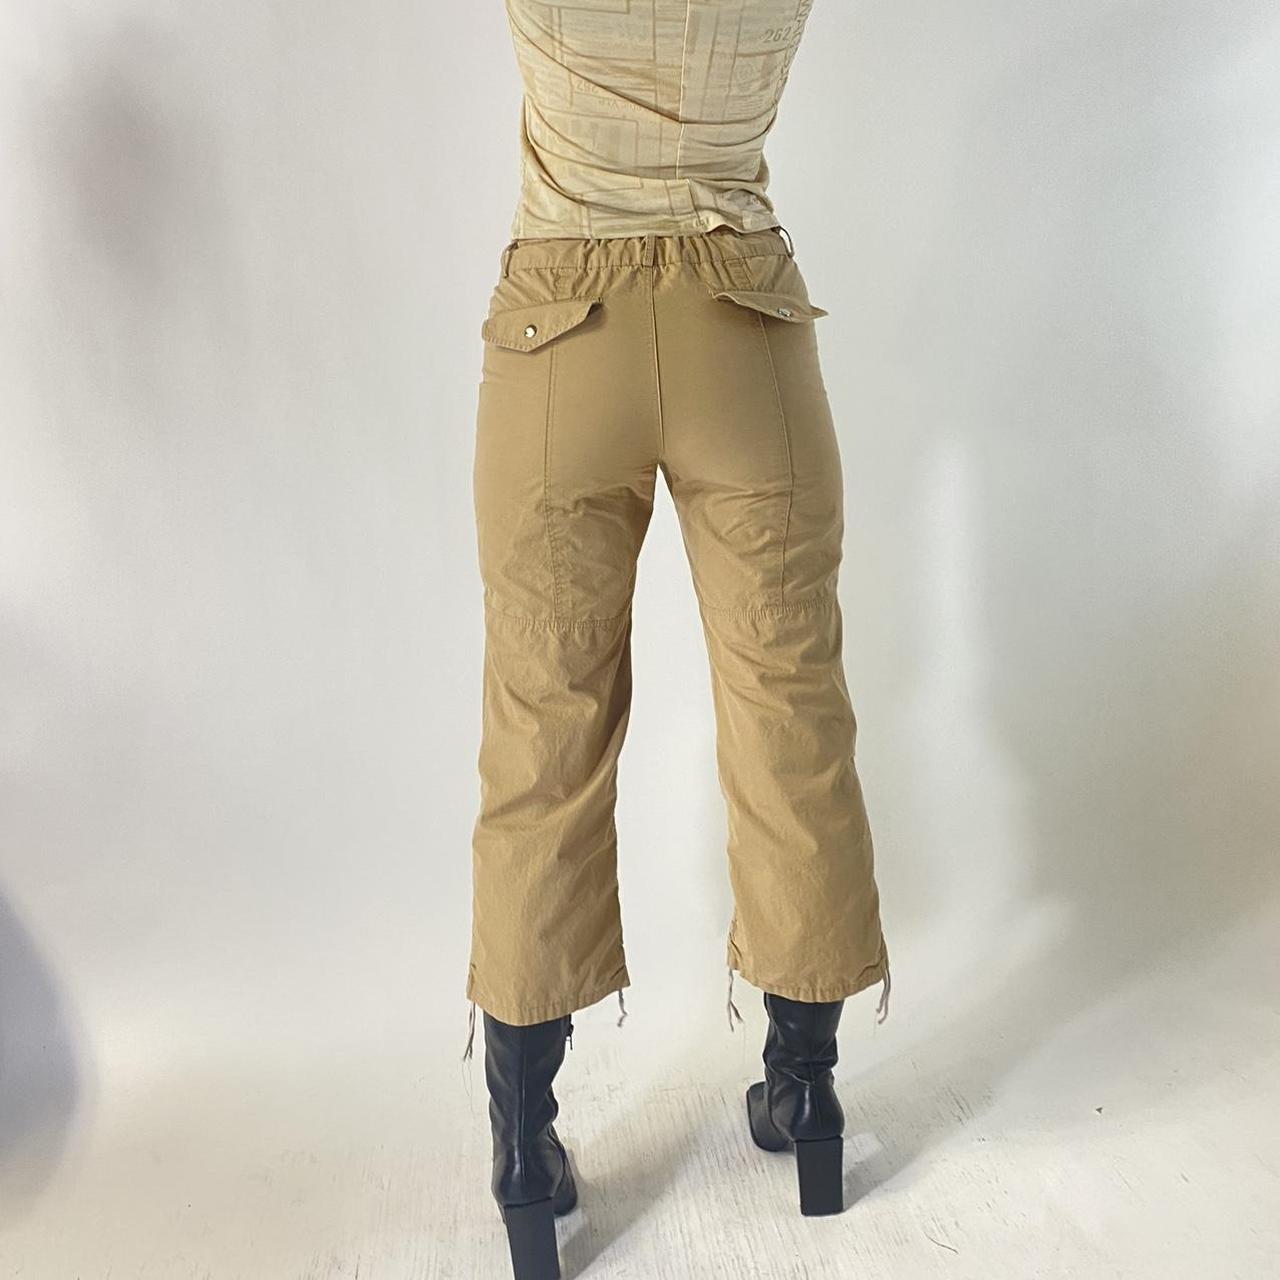 Dockers Women's Tan and Brown Trousers (3)